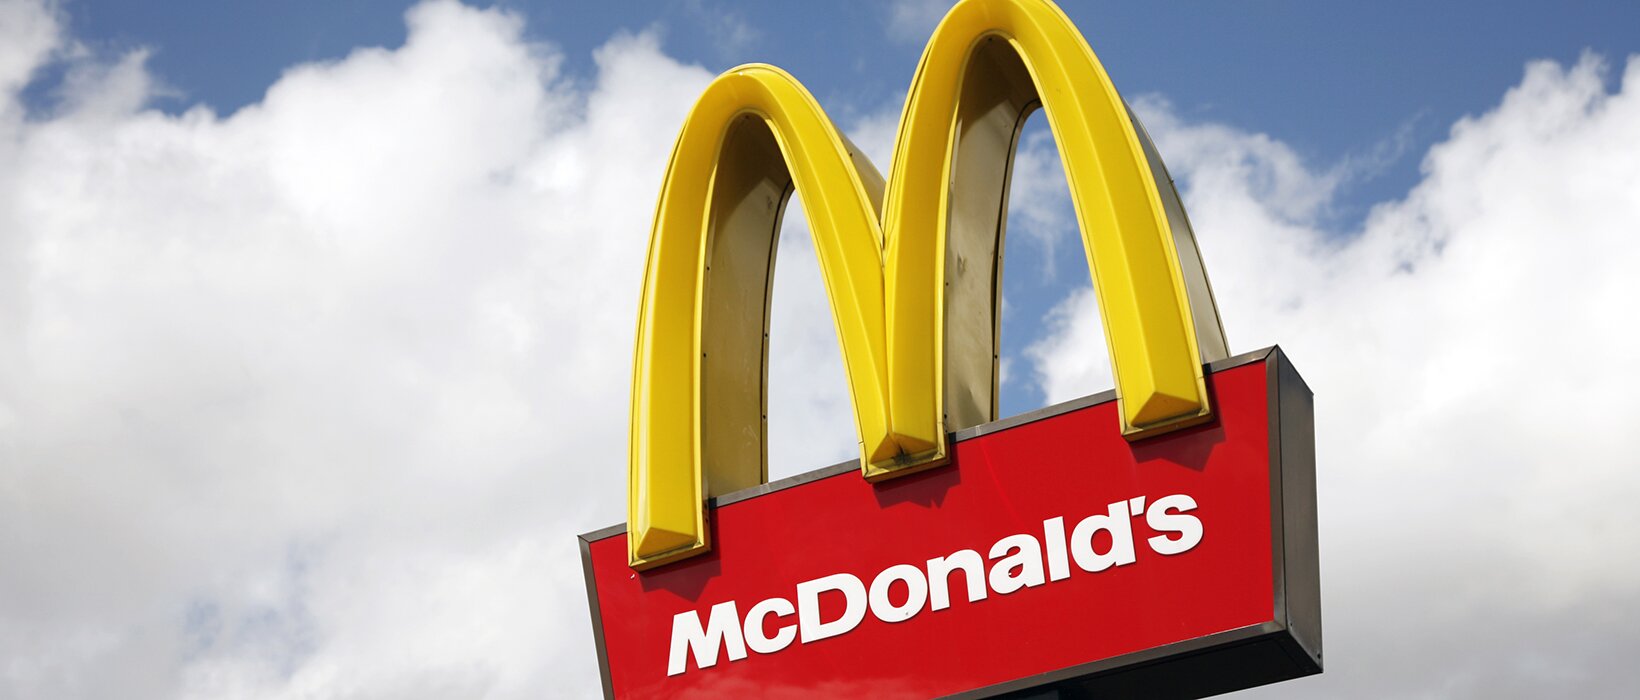 McDonald's closes for deep clean after customer brings live insects to feed pet snake 